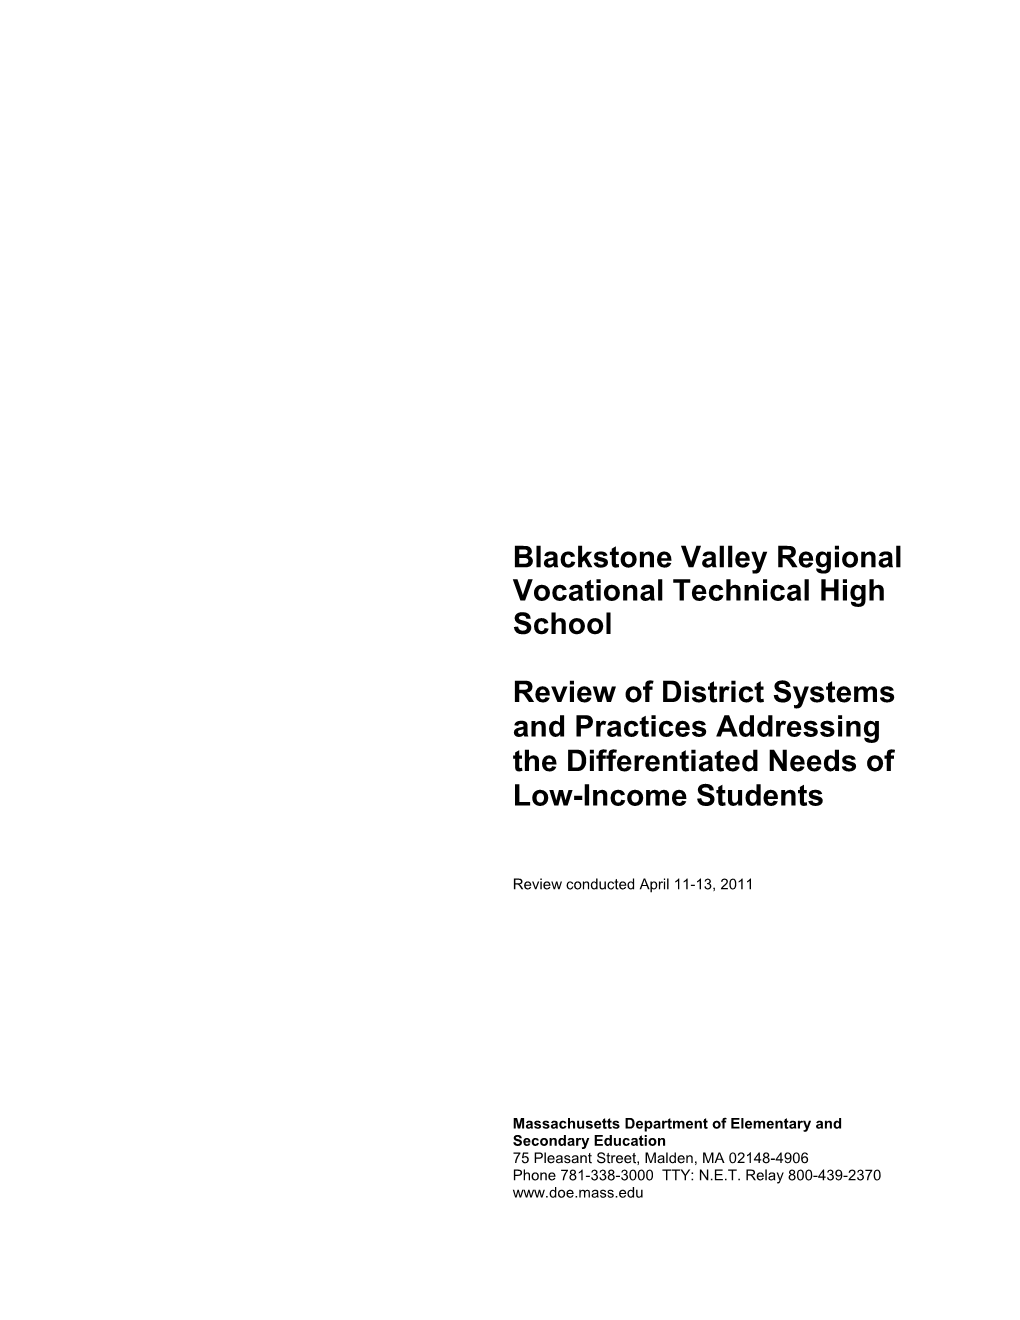 Blackstone Valley Differentiated Needs (Low-Income) Review Report, 2011 Onsite